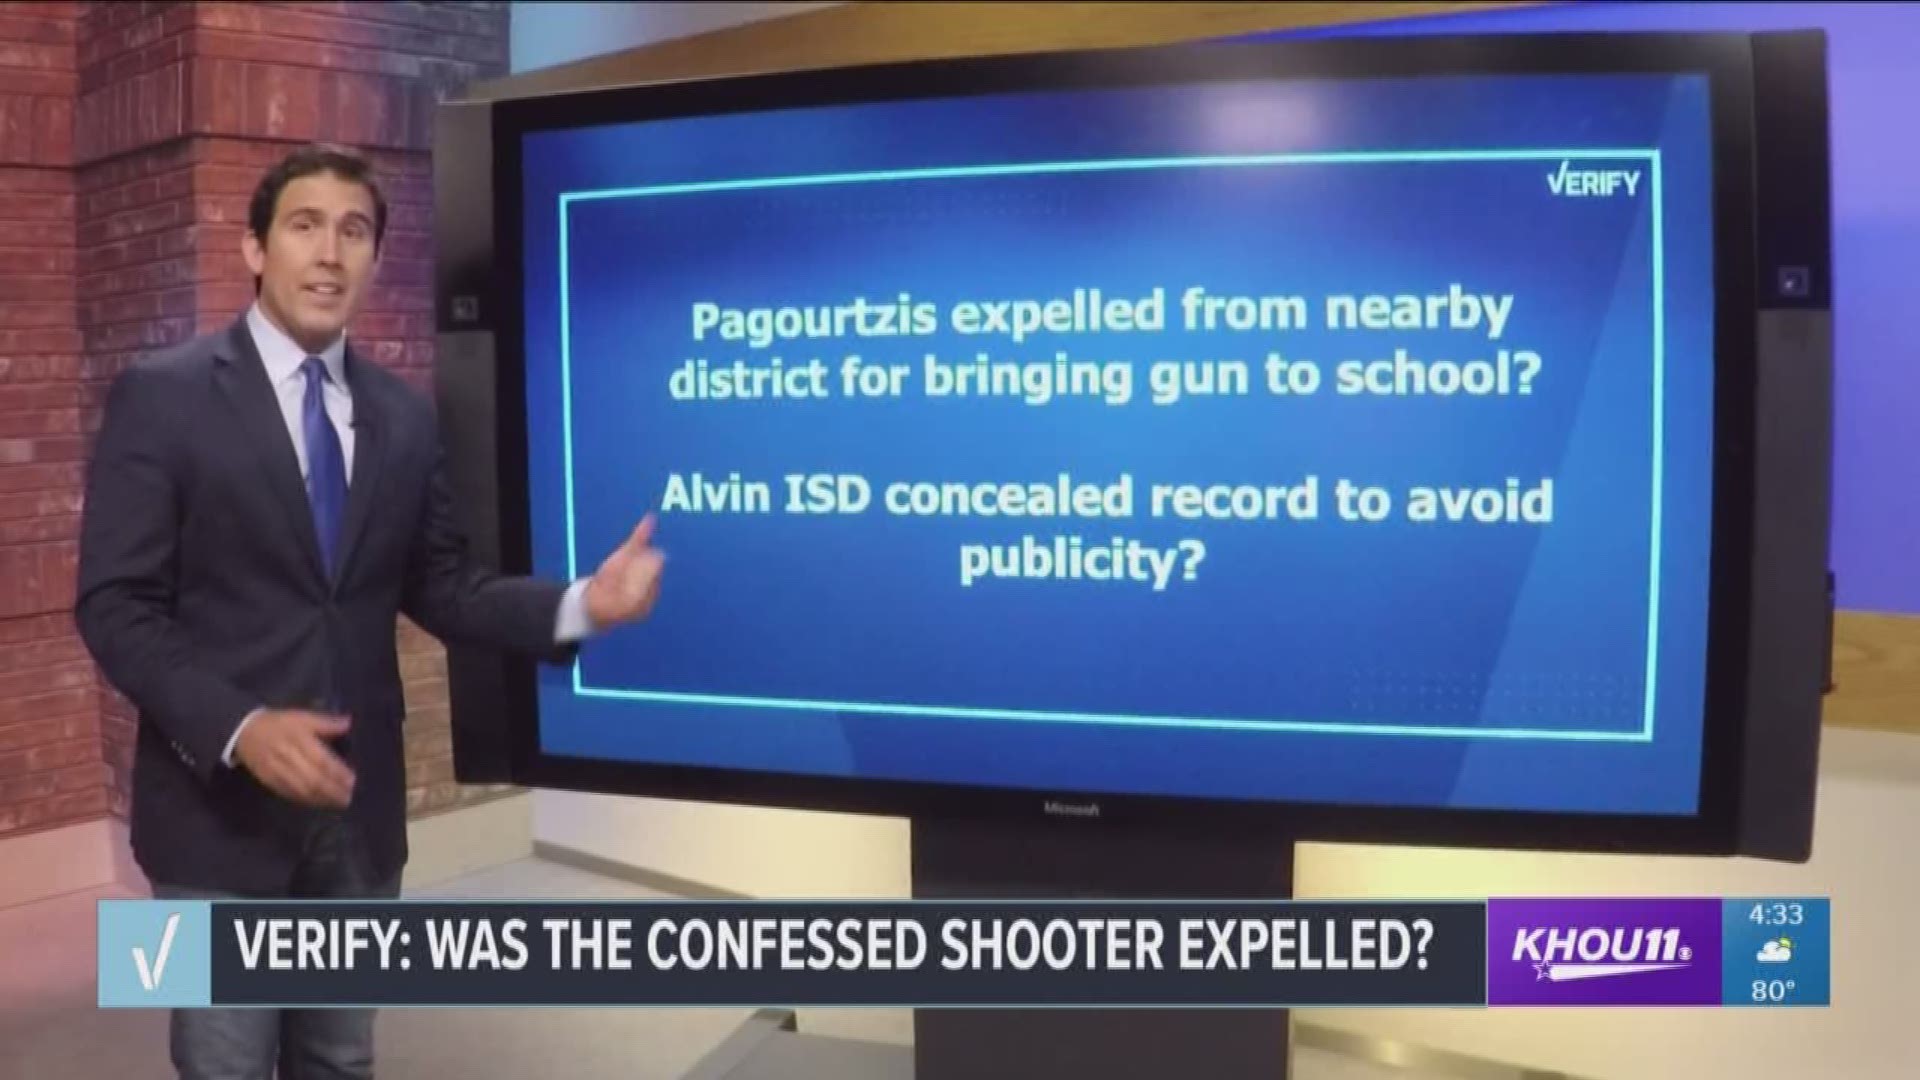 A viewer reached out to our Verify team and asked if the accused Santa Fe High School shooter was expelled from another district for brining a firearm to school.